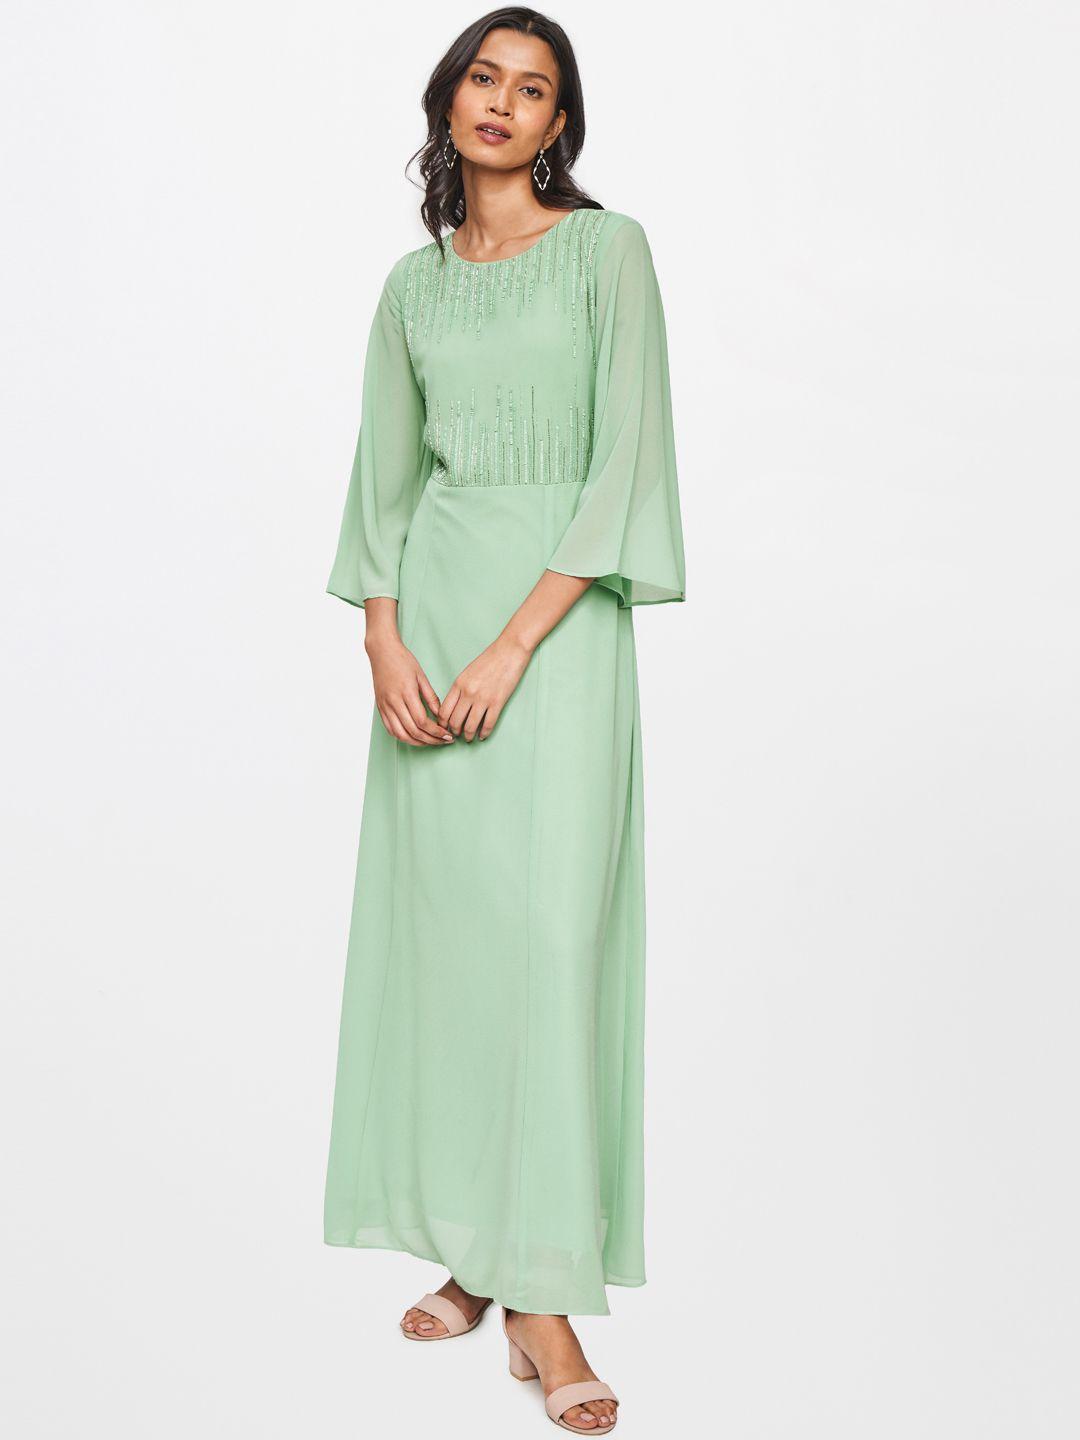 and green embellished maxi dress